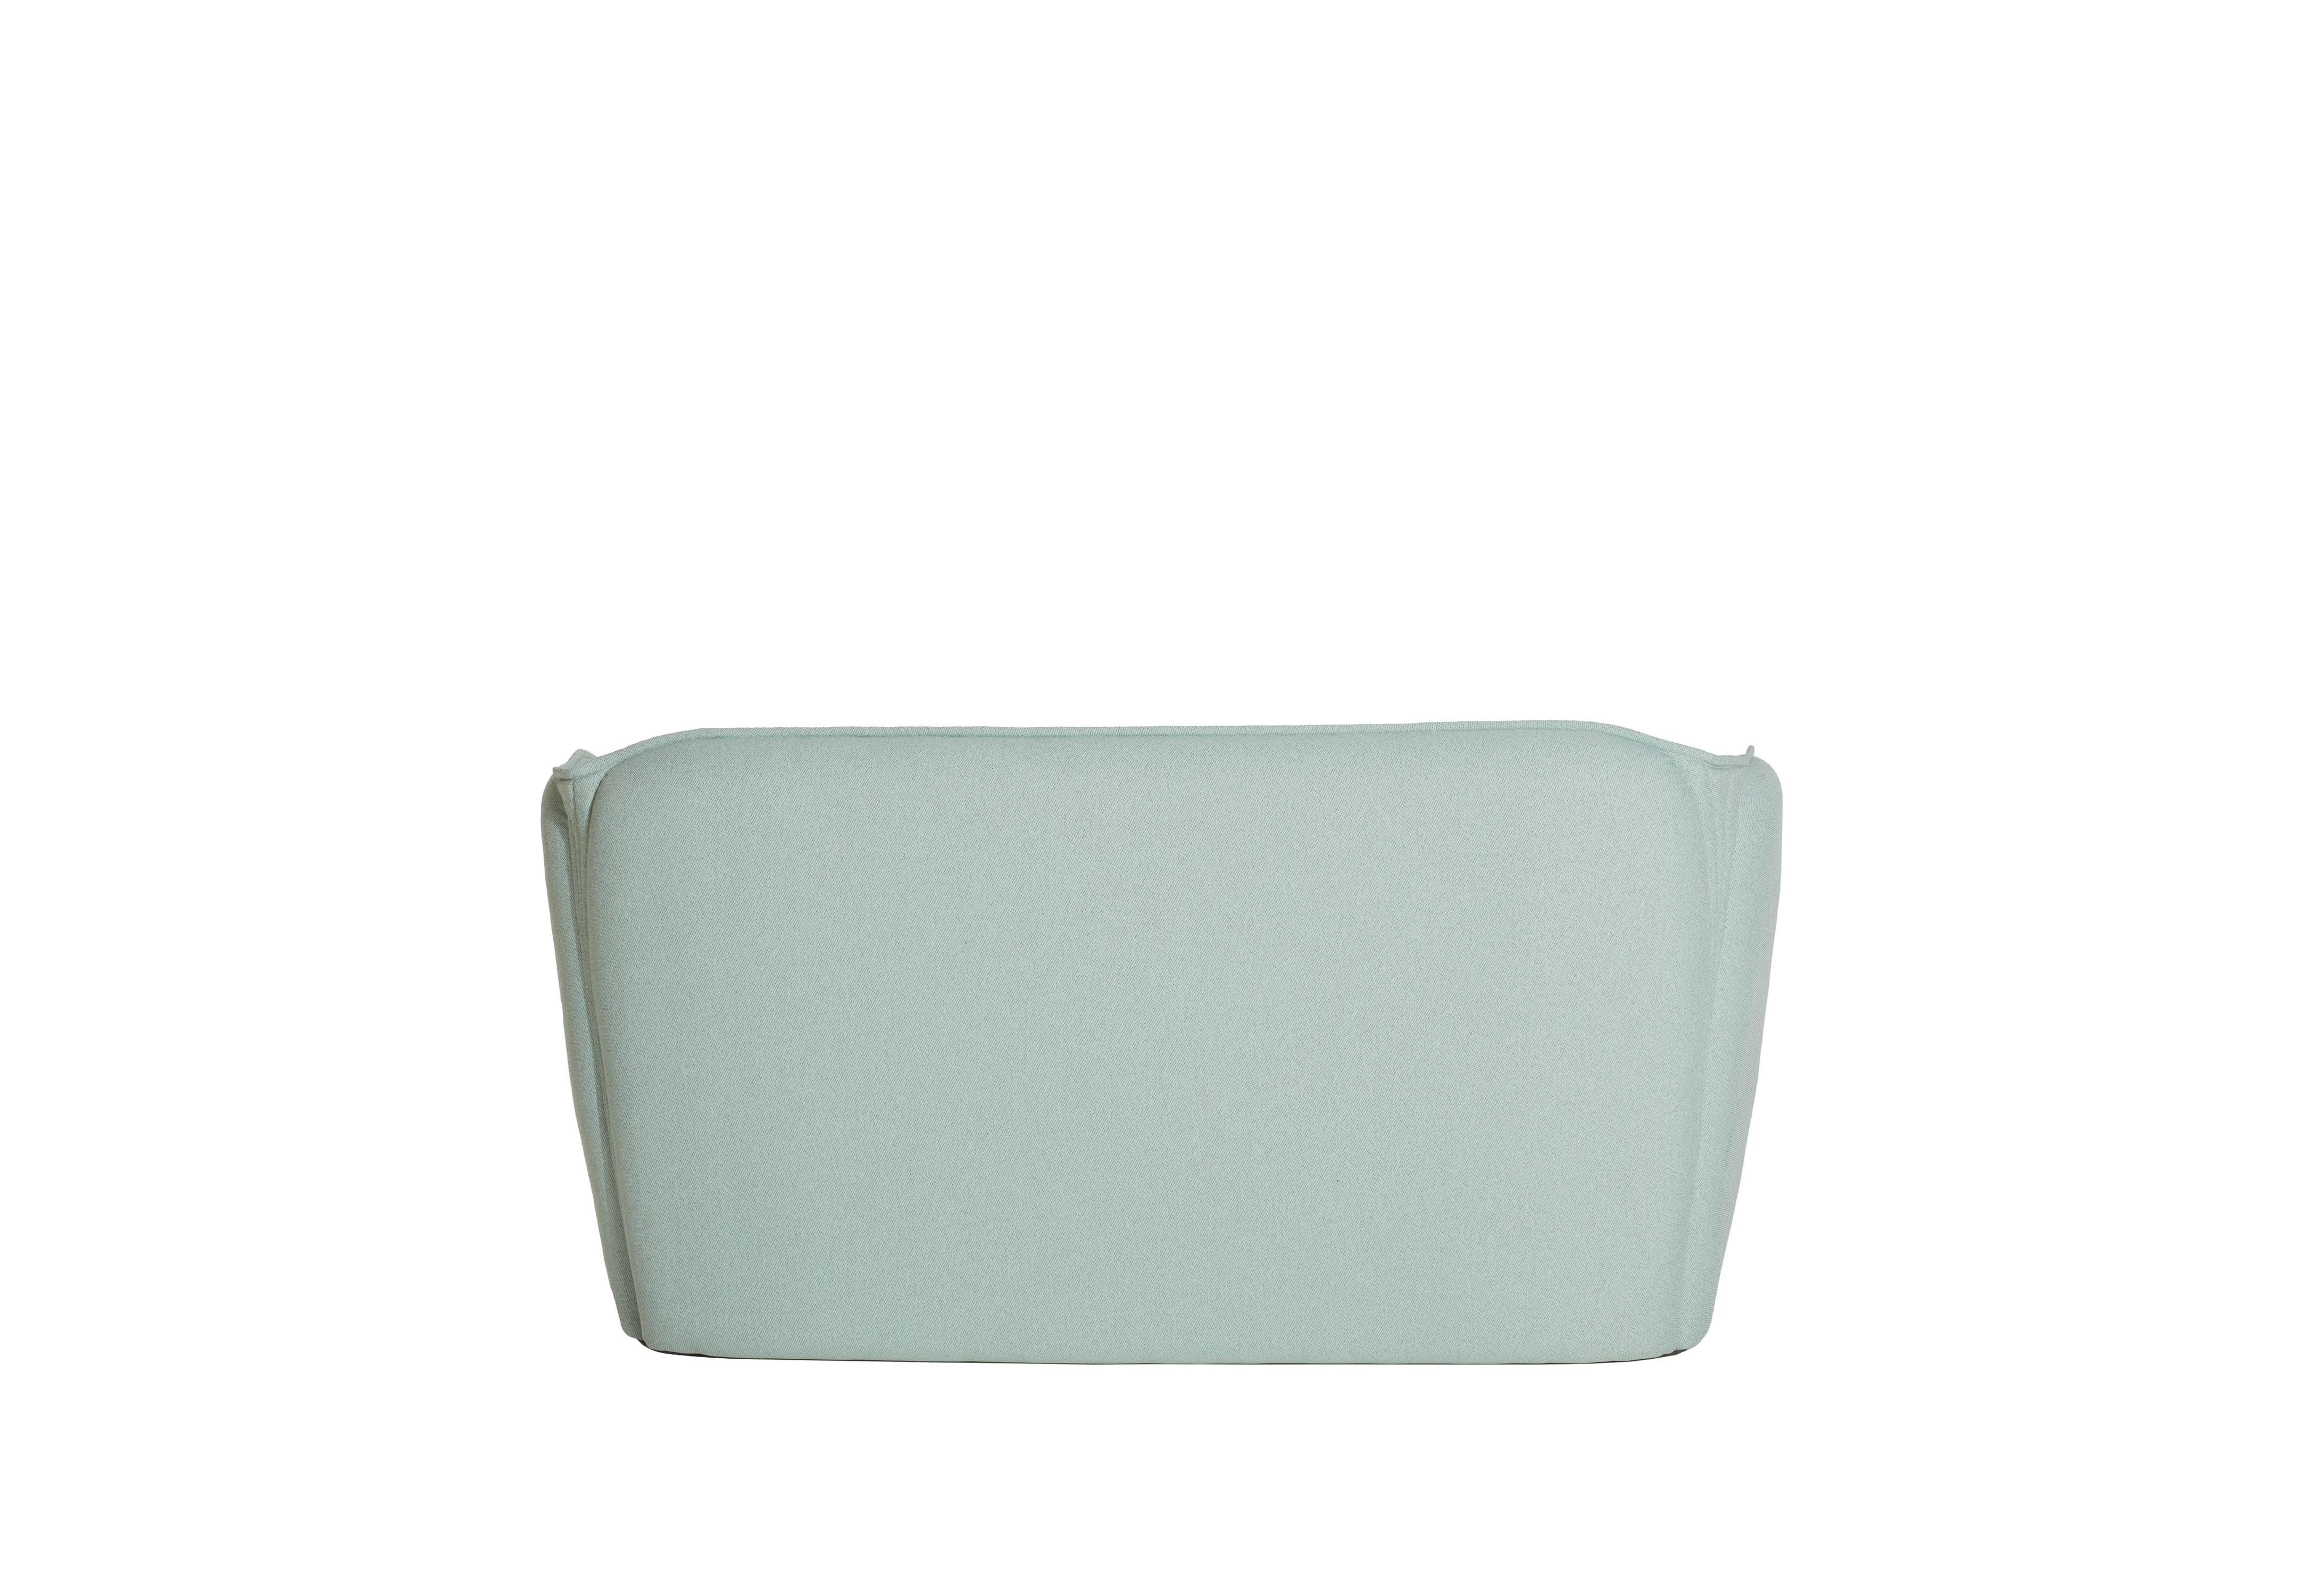 Petite Friture Lily Sofa in Light Blue by Färg & Blanche, 2022 In New Condition For Sale In Brooklyn, NY